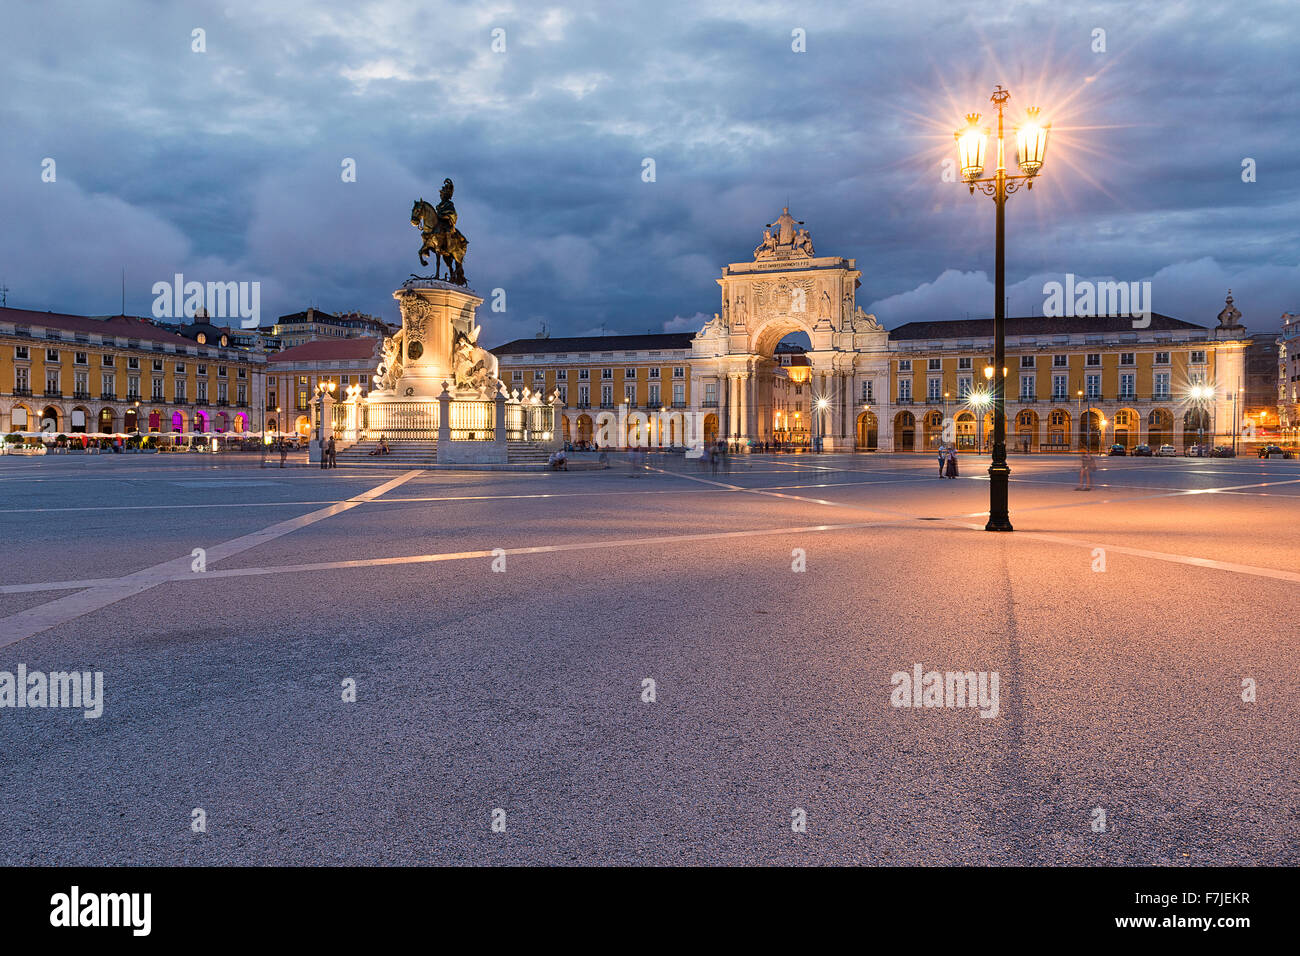 View of the Praca do Comercio in Lisbon, Portugal, at dusk Stock Photo